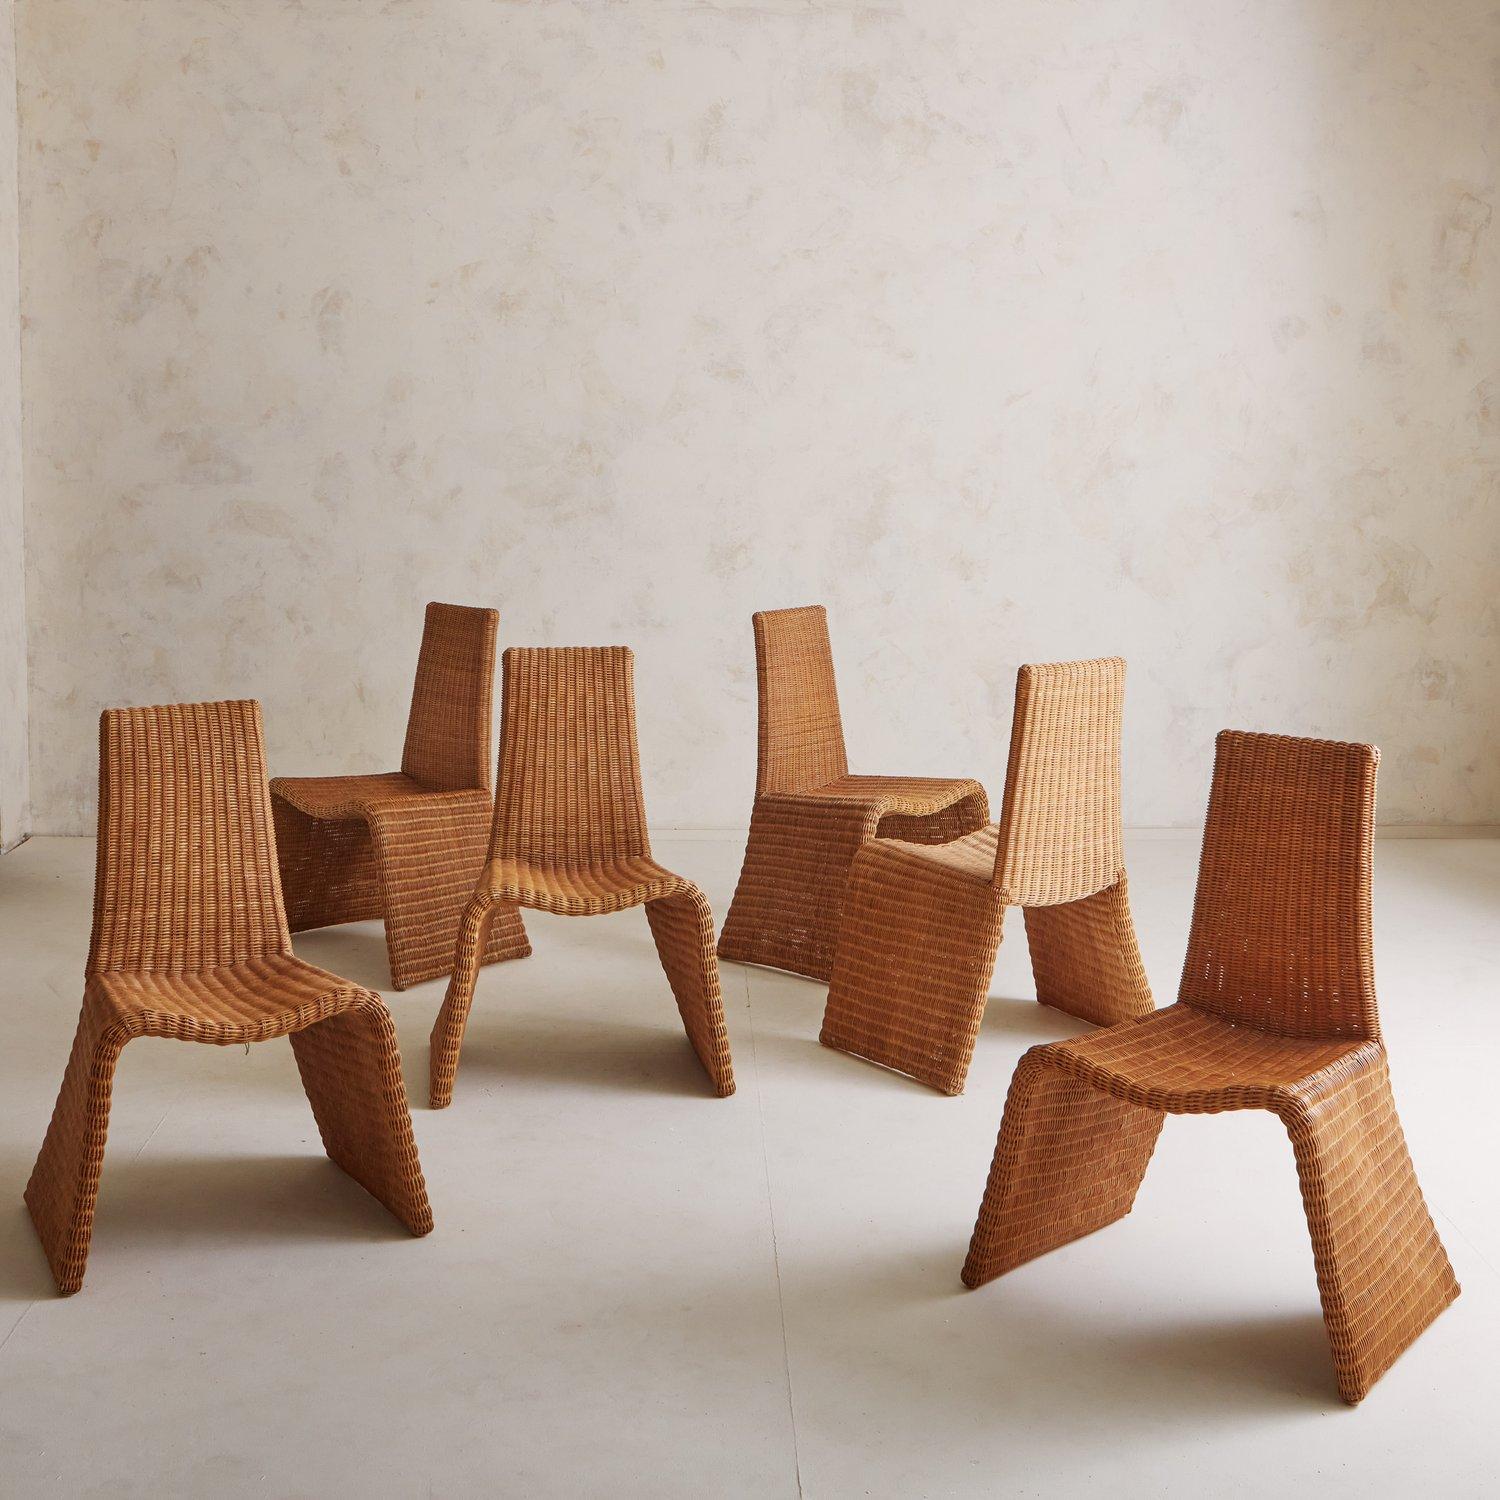 A set of 5 wicker dining chairs featuring sculptural frames with angled legs which connect seamlessly to the seat. We love the dramatic proportions on these statement chairs sourced in Spain, 20th Century.

6 chairs are pictured in the photos; we